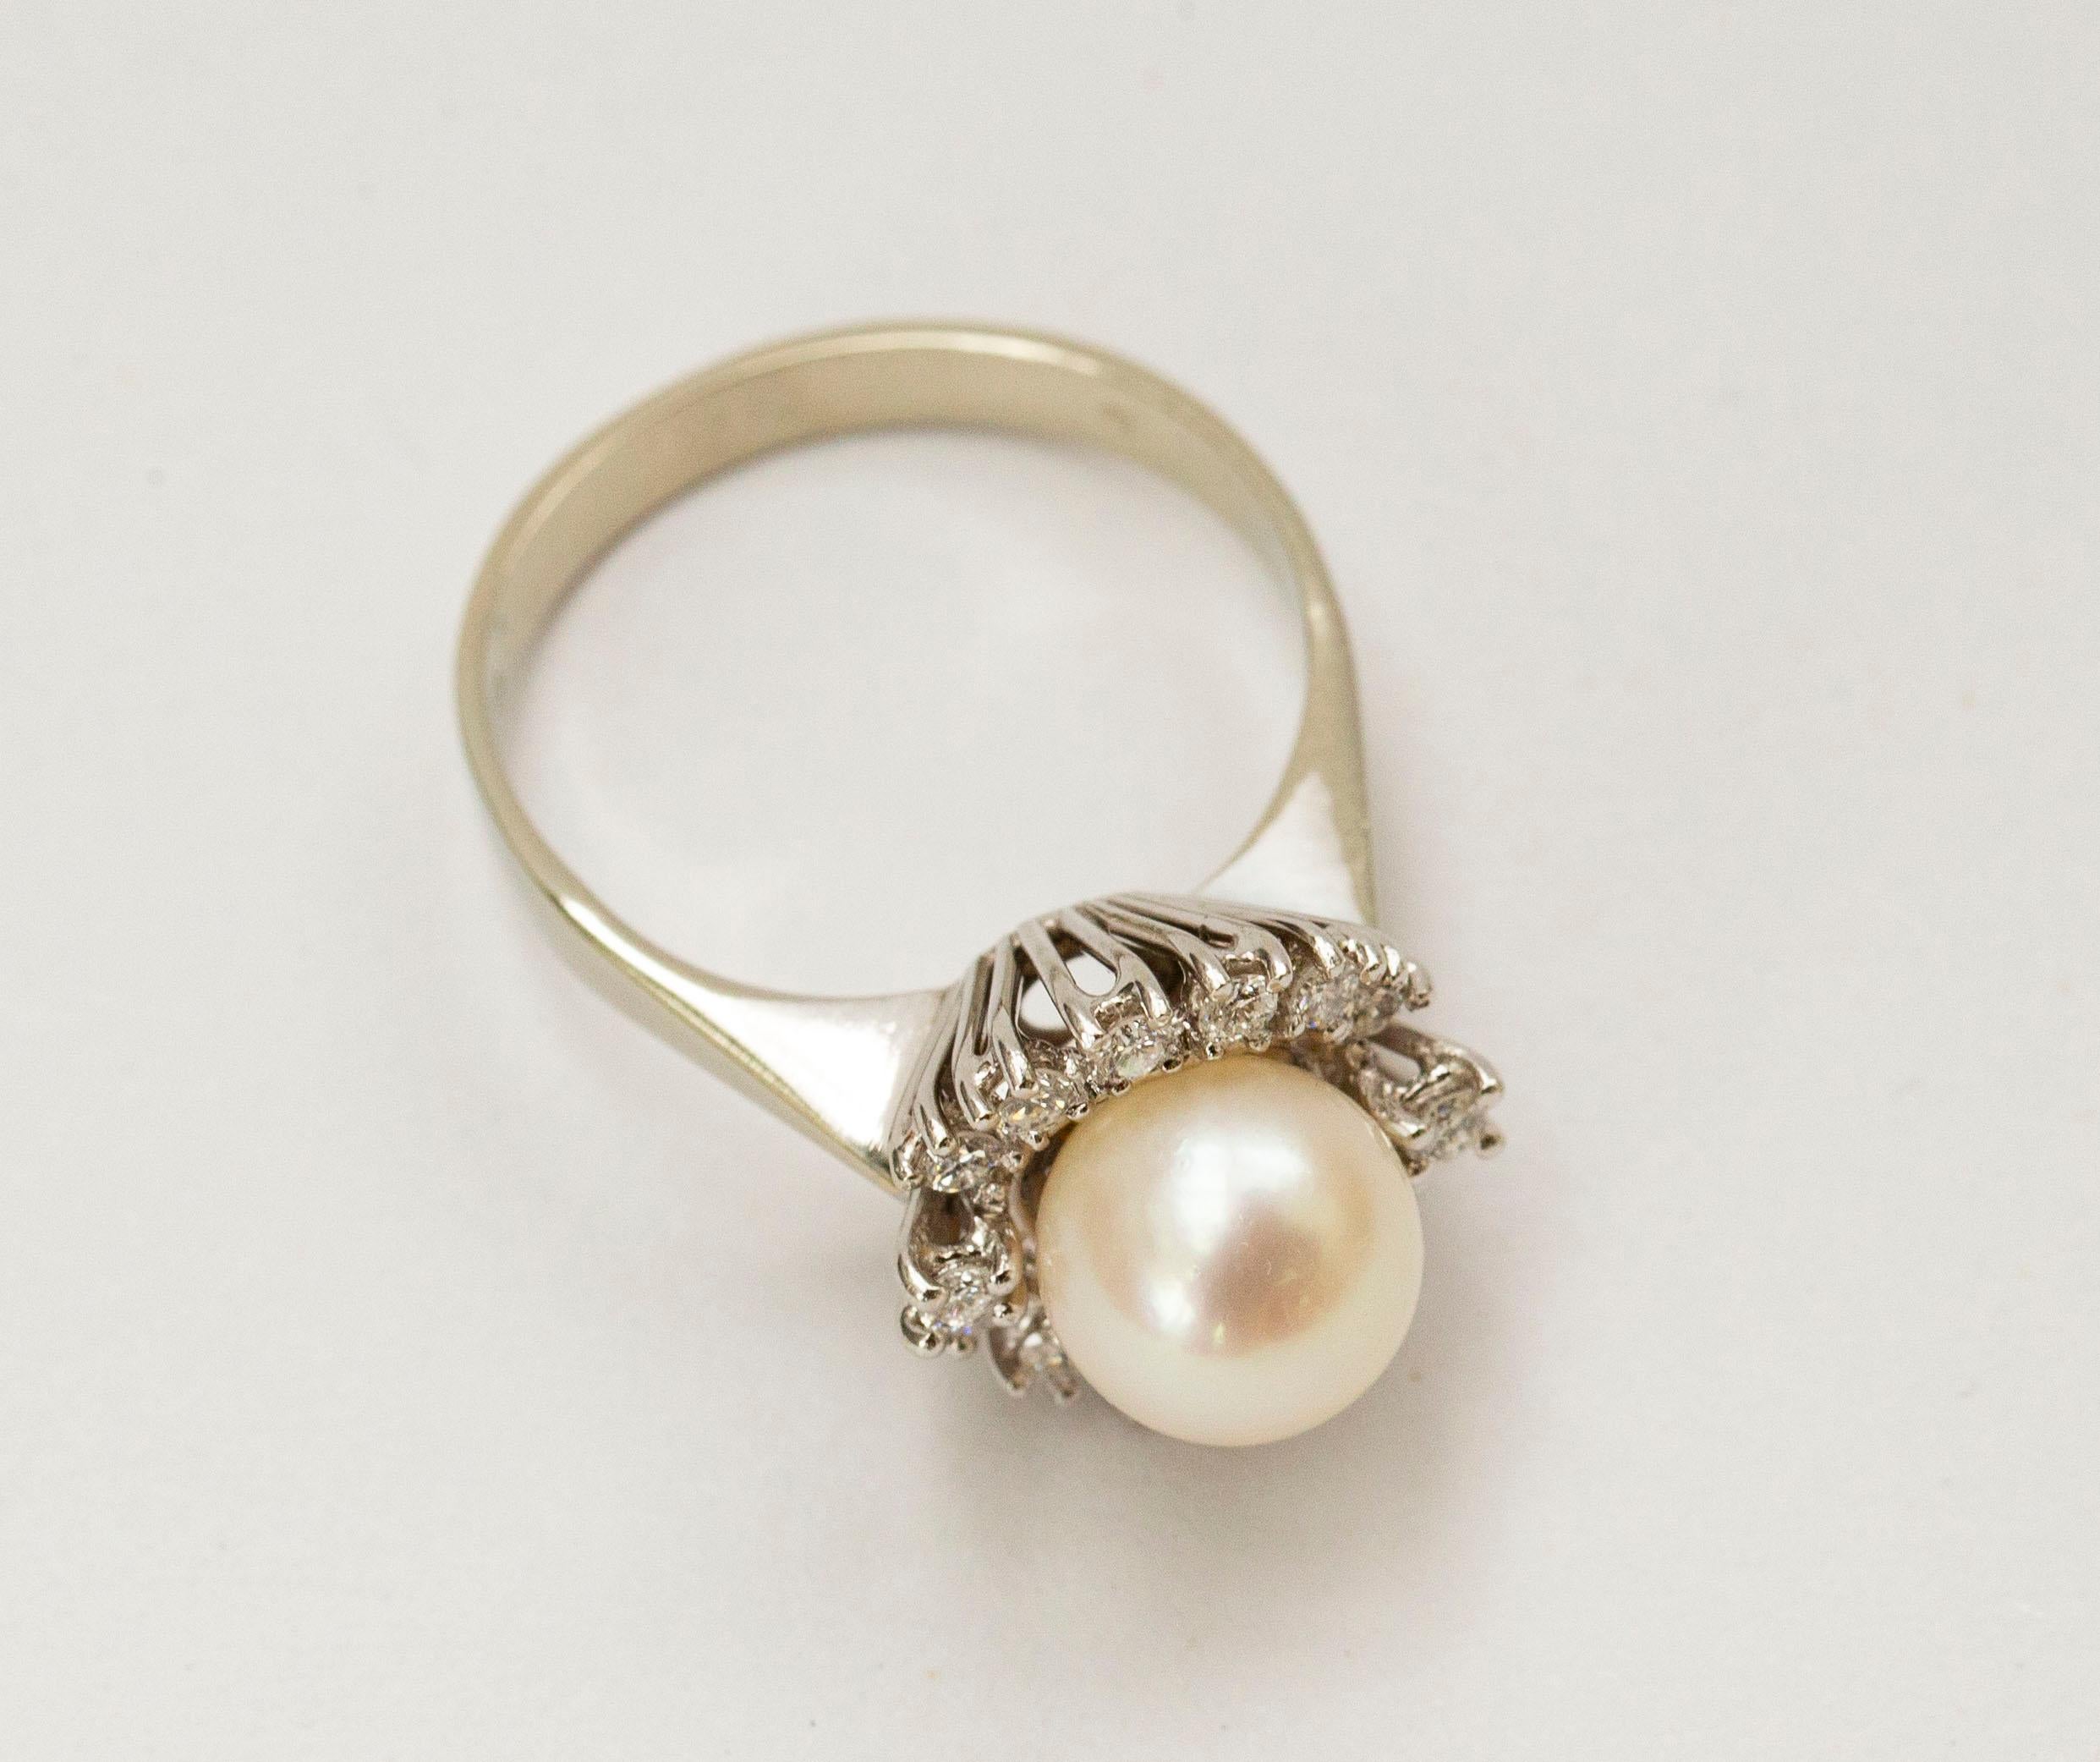 An 18 kt. white gold entrourage ring /cluster ring with a pearl and diamond cluster. The central freshwater pearl is surrounded by fourteen brilliant cut diamonds of the weight of approx. 0.28 ct. The ring is stamped with 750 that stands for the 18